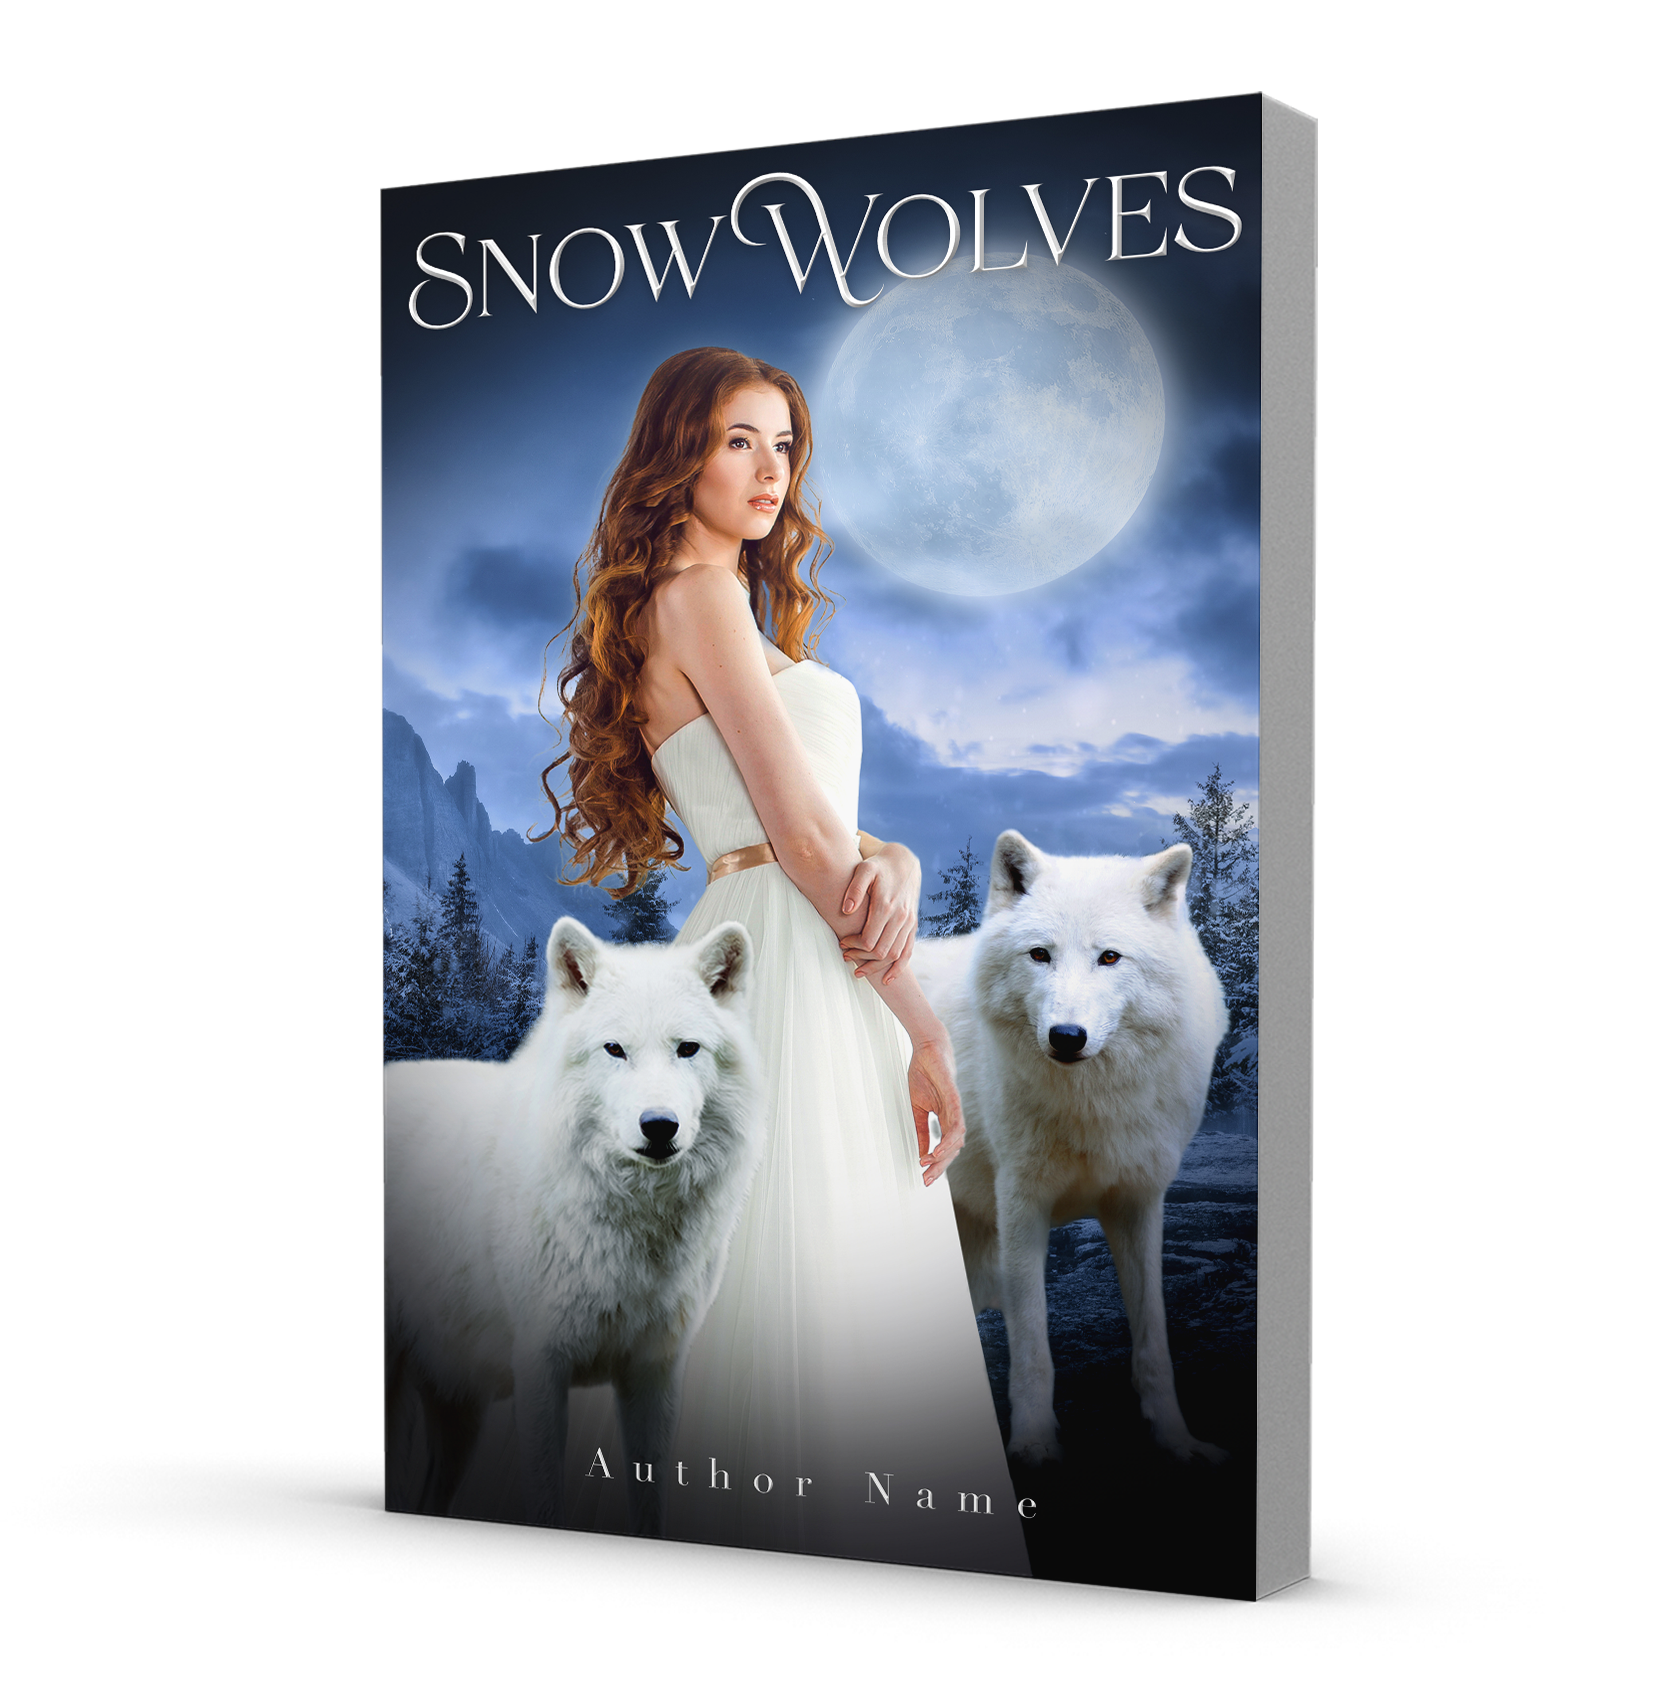 A long-haired woman in a dress under a mountain moon with two white wolves.